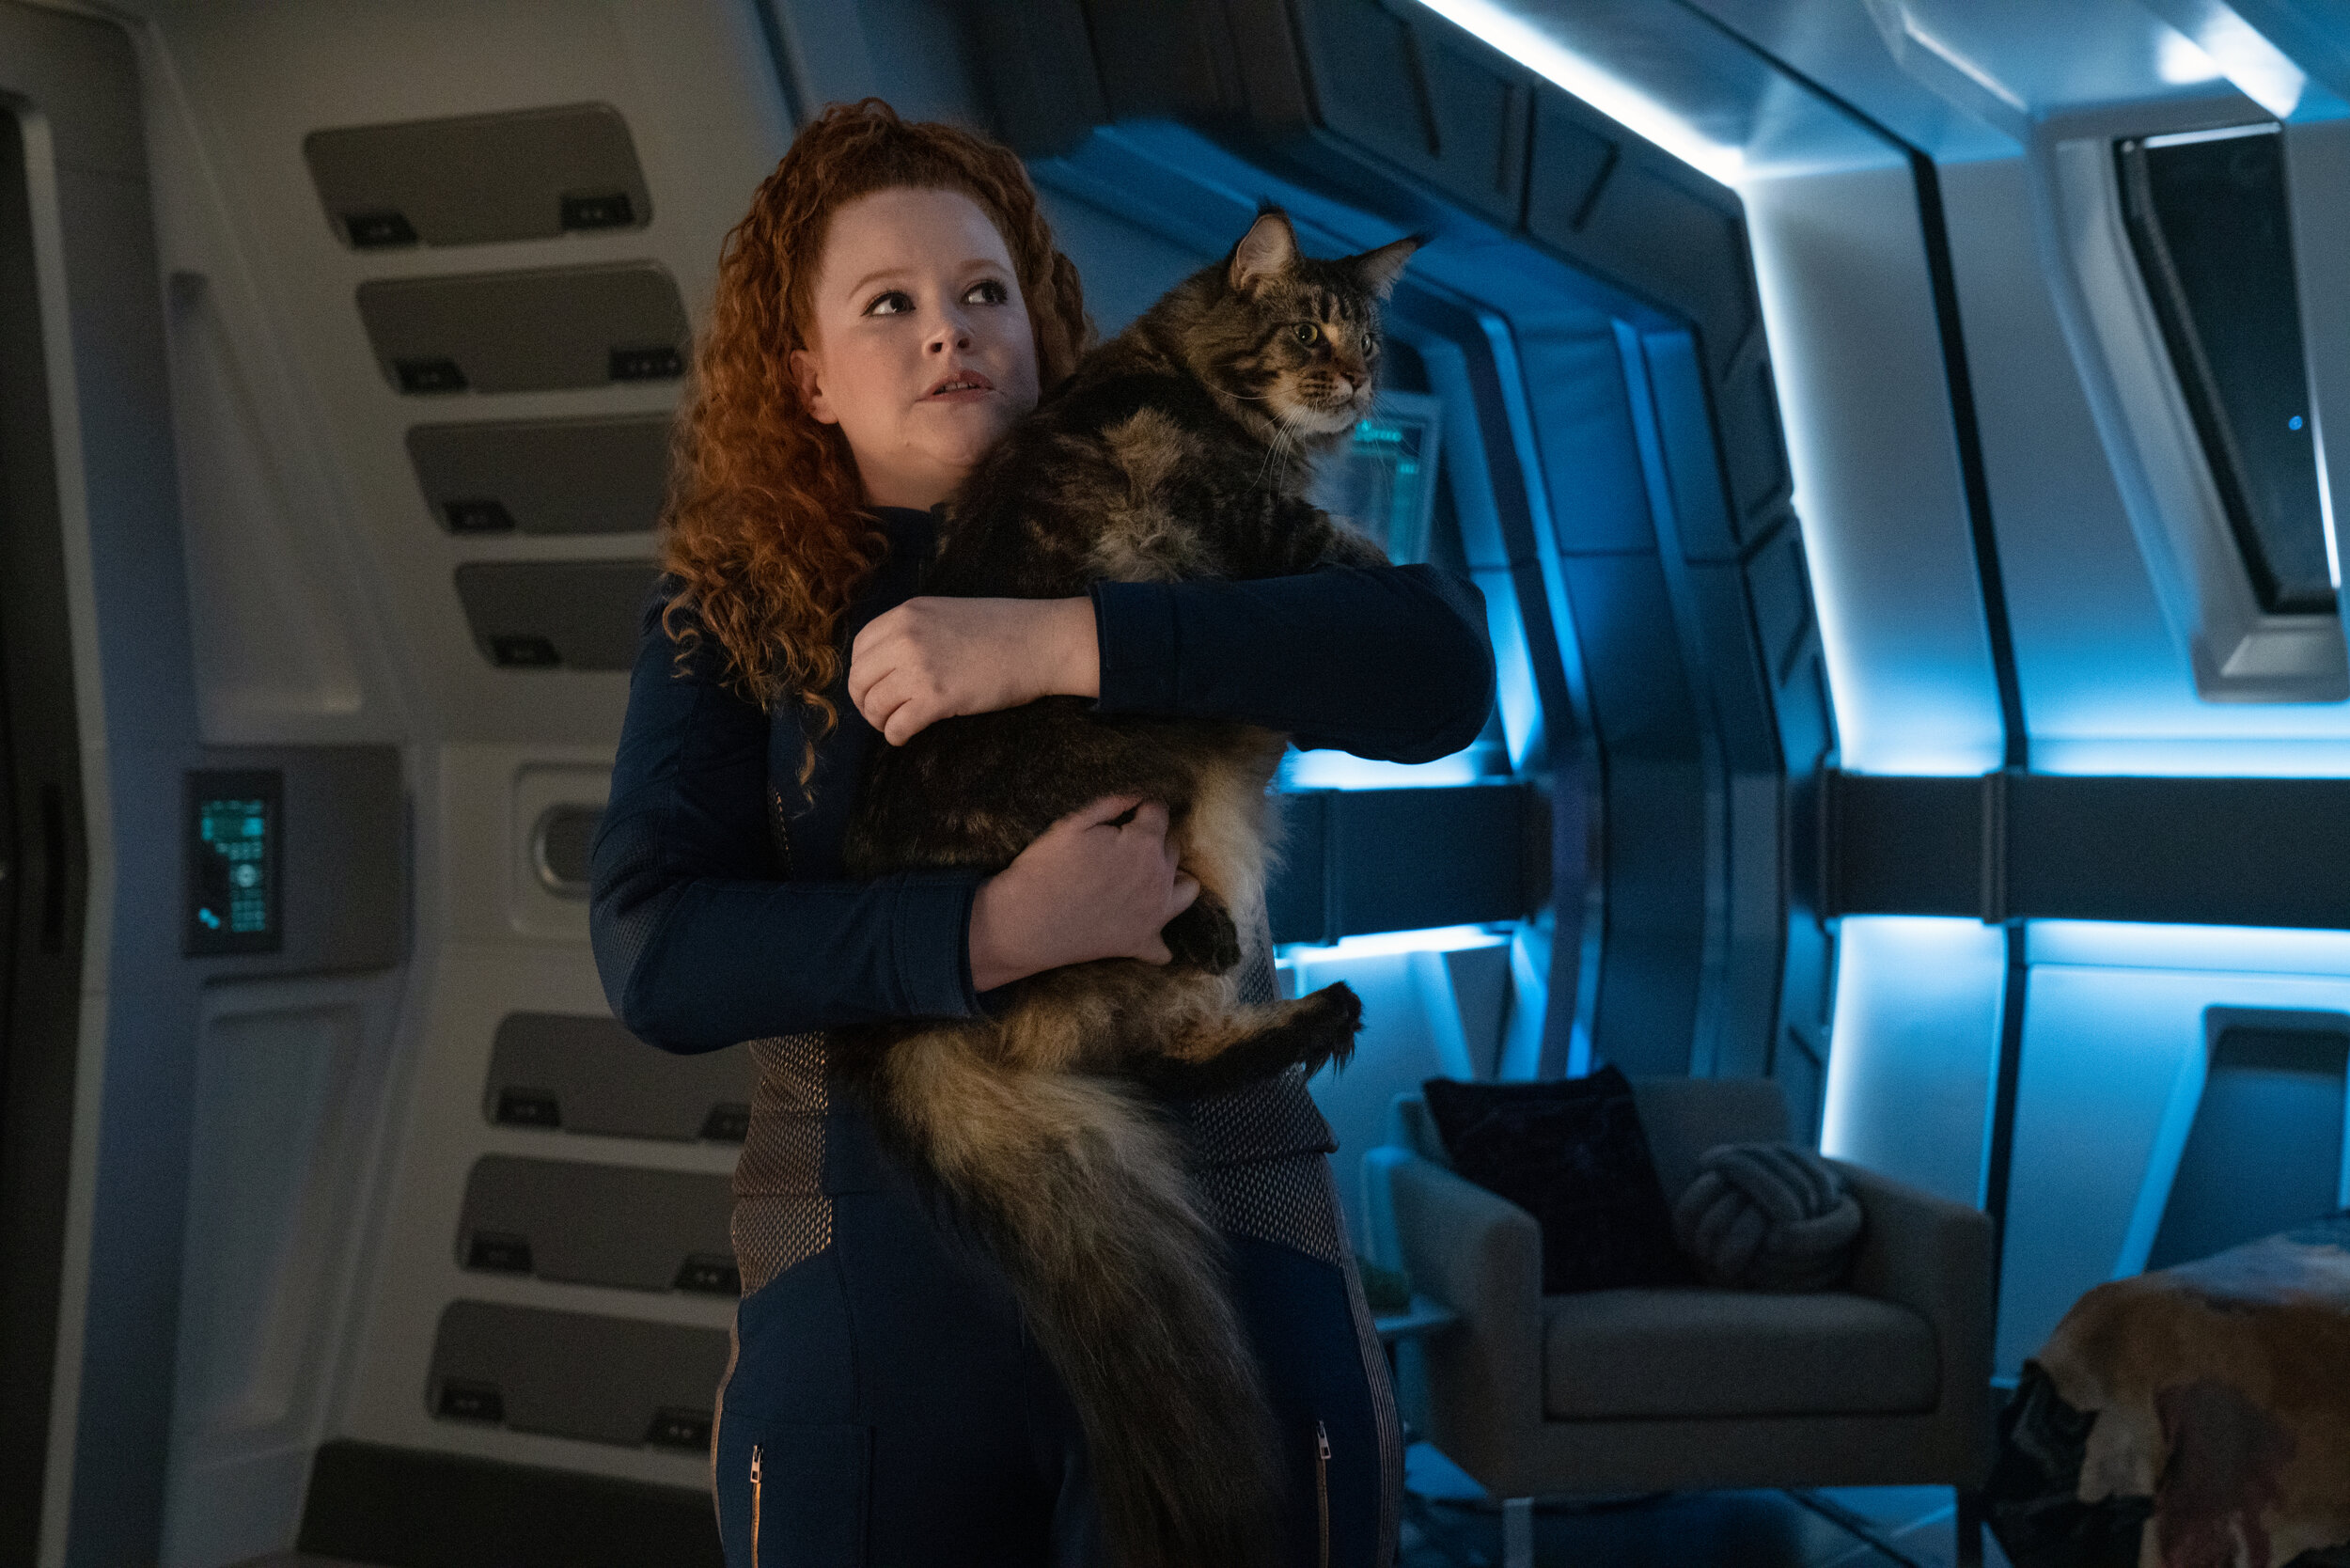   "Scavengers" -- Ep#306 -- Pictured: Mary Wiseman as Tilly of the CBS All Access series STAR TREK: DISCOVERY. Photo Cr: Michael Gibson/CBS ©2020 CBS Interactive, Inc. All Rights Reserved.  